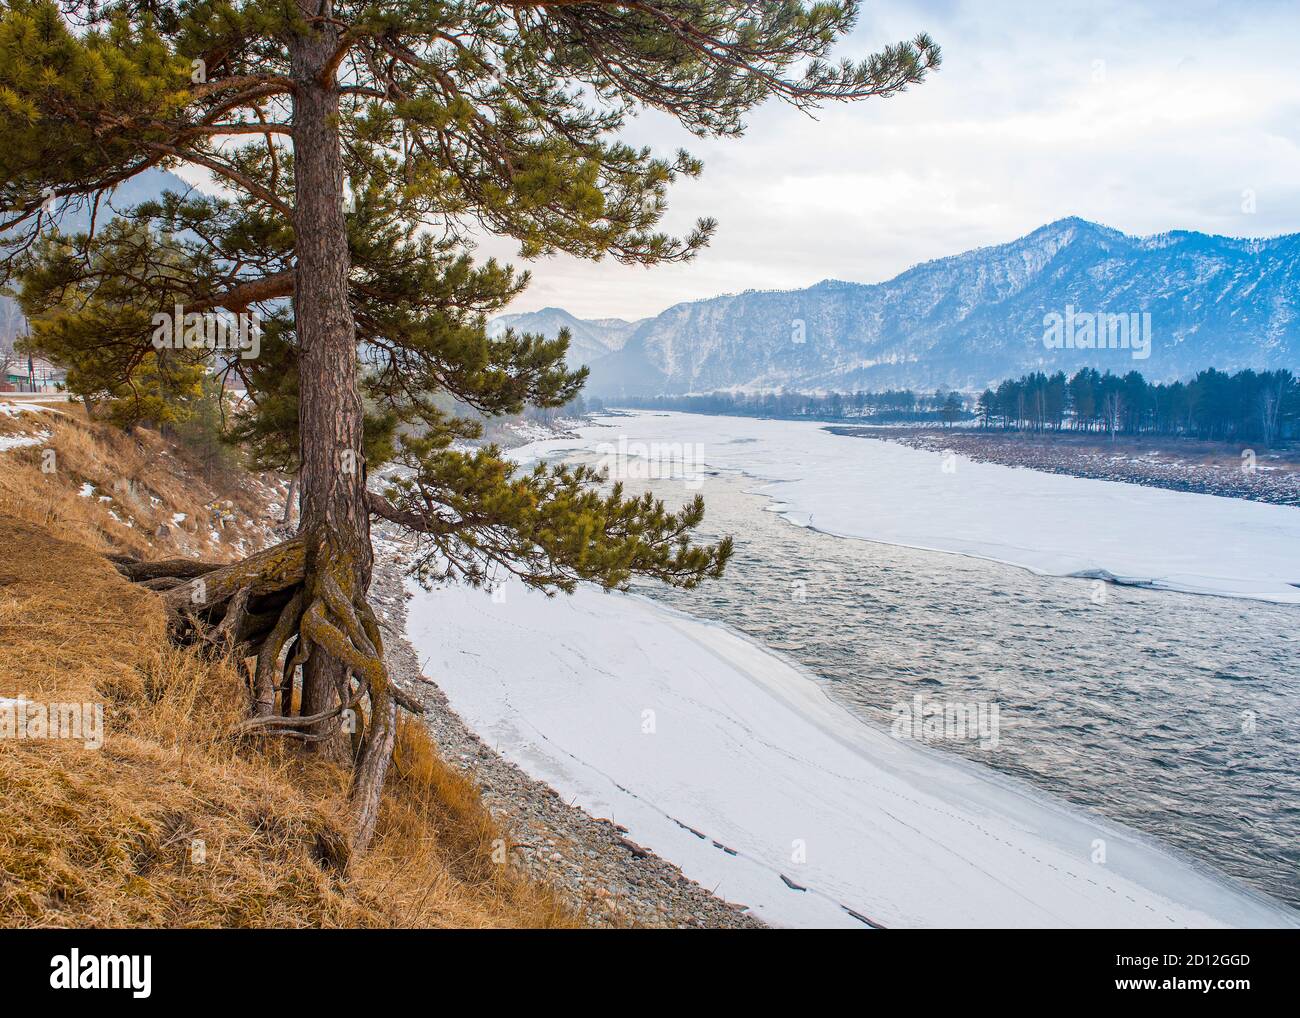 A lonely tree with gnarled roots on Katun River covered by ice in Mountain Altai region of Russia Stock Photo